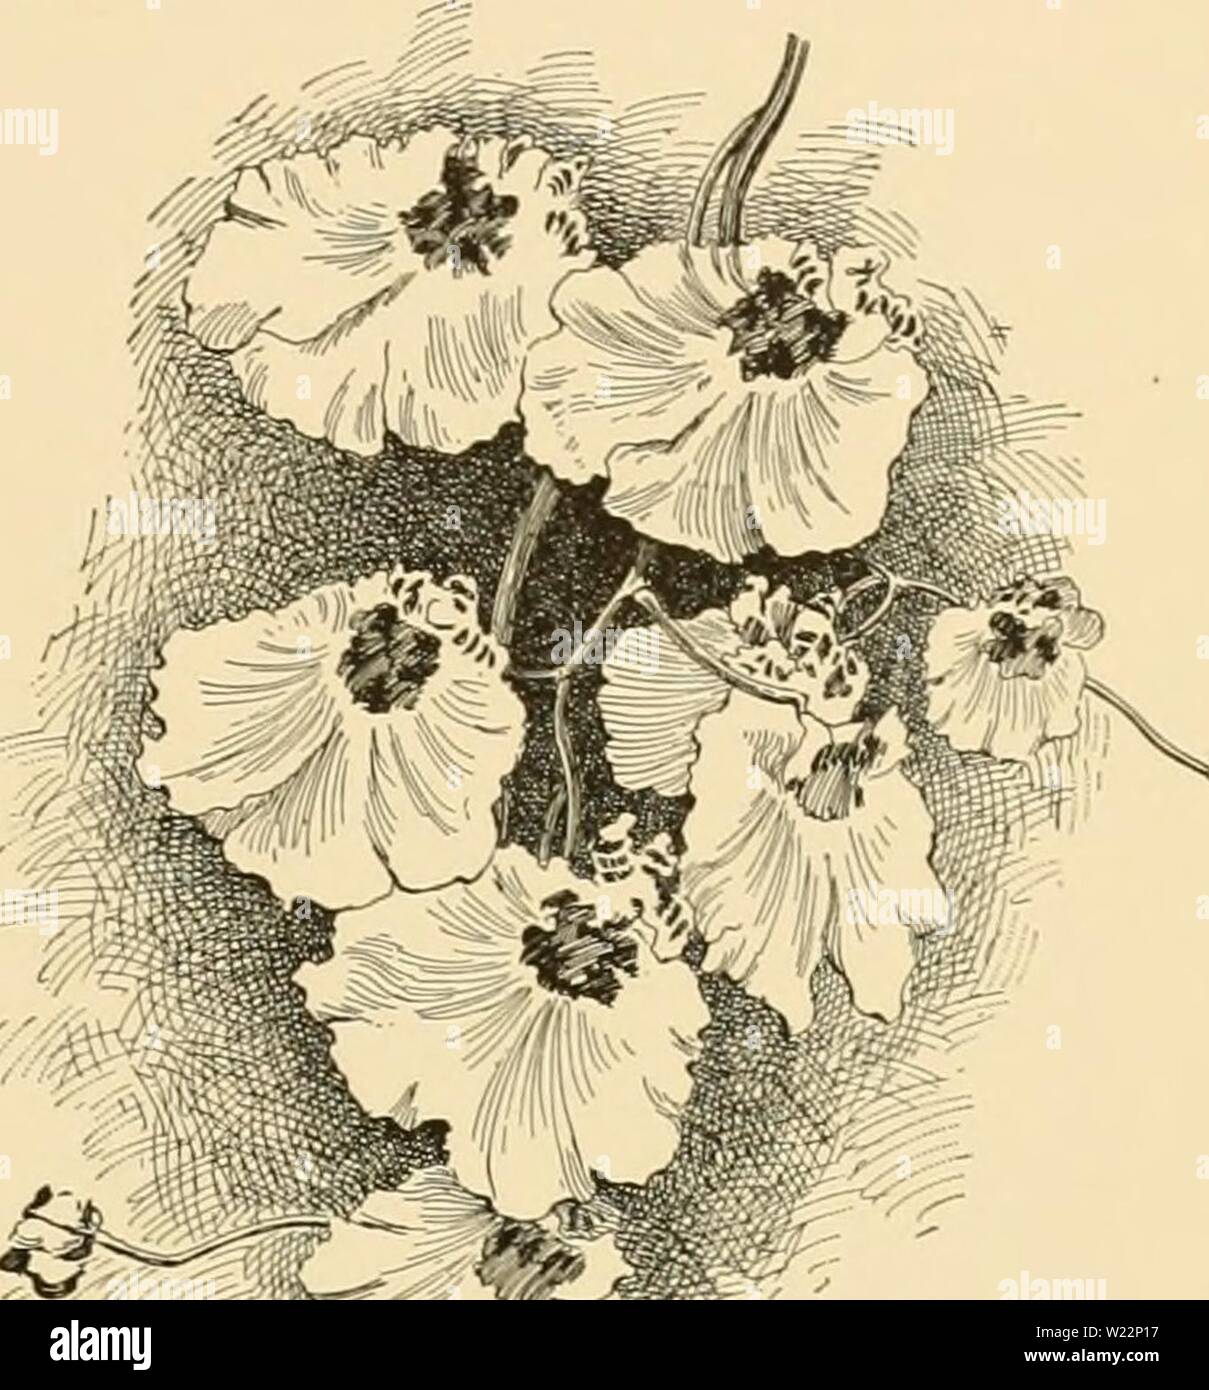 Archive image from page 104 of Cyclopedia of American horticulture . Cyclopedia of American horticulture : comprising suggestions for cultivation of horticultural plants, descriptions of the species of fruits, vegetables, flowers, and ornamental plants sold in the United States and Canada, together with geographical and biographical sketches  cyclopediaofame03bail Year: 1906  ONCIDIUM 6. MarshaUiJLnum, Reichb. f. Pseudobulbs ovoid, 2-4 in. long: Ivs. narrowly oblong, G-8 in. long: fls. nu- merous, 2 in. across, borne on a stout panicle 1-2 ft. high; the upper sepals oblong apiculate, the later Stock Photo